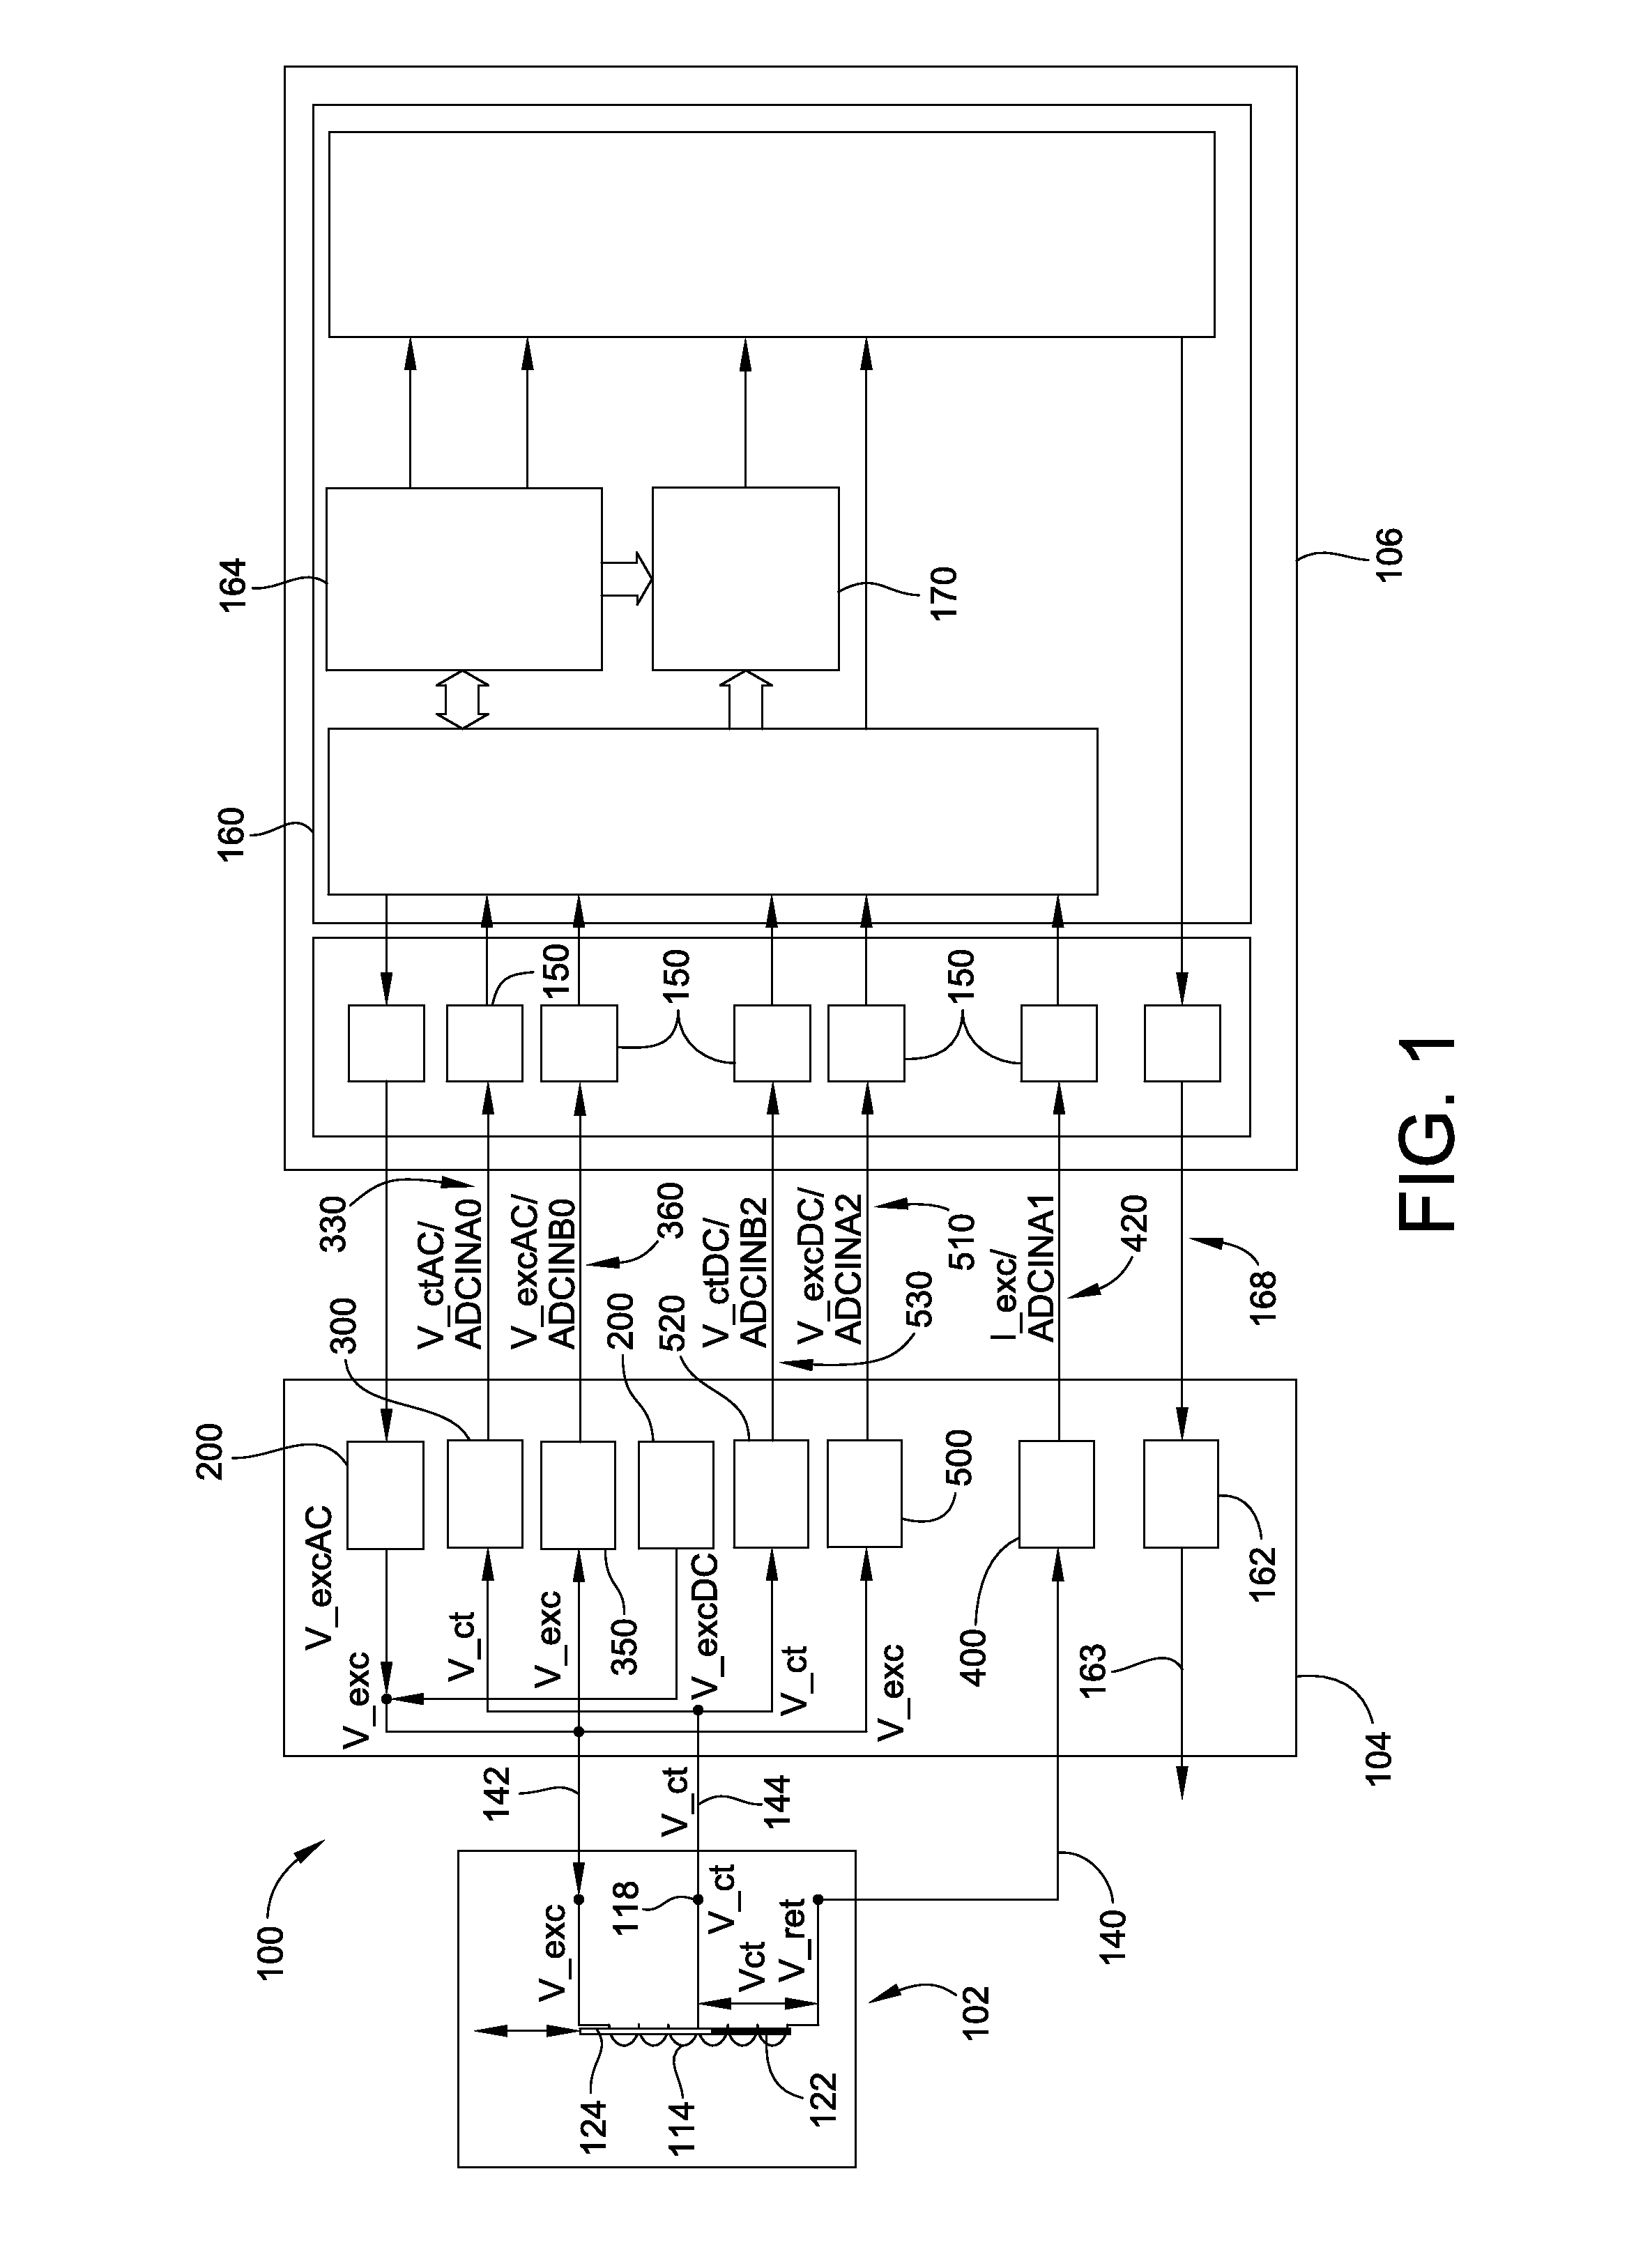 Method and Apparatus for a Half-Bridge Variable Differential Transformer Position Sensing System